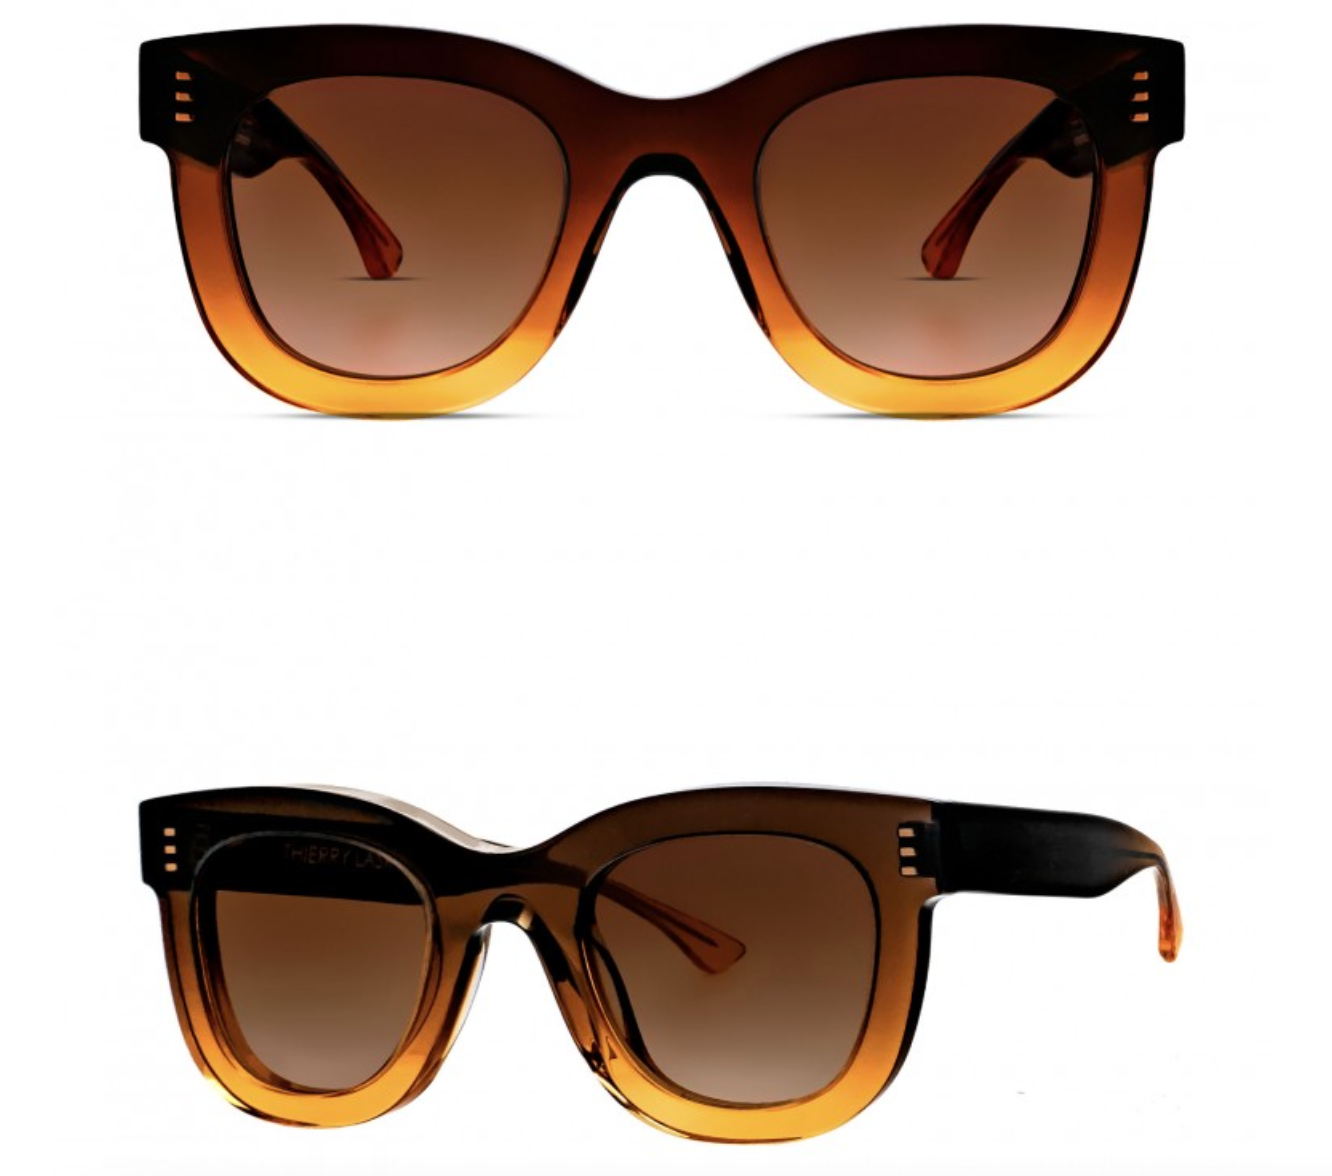 Thierry Lasry - Gambly